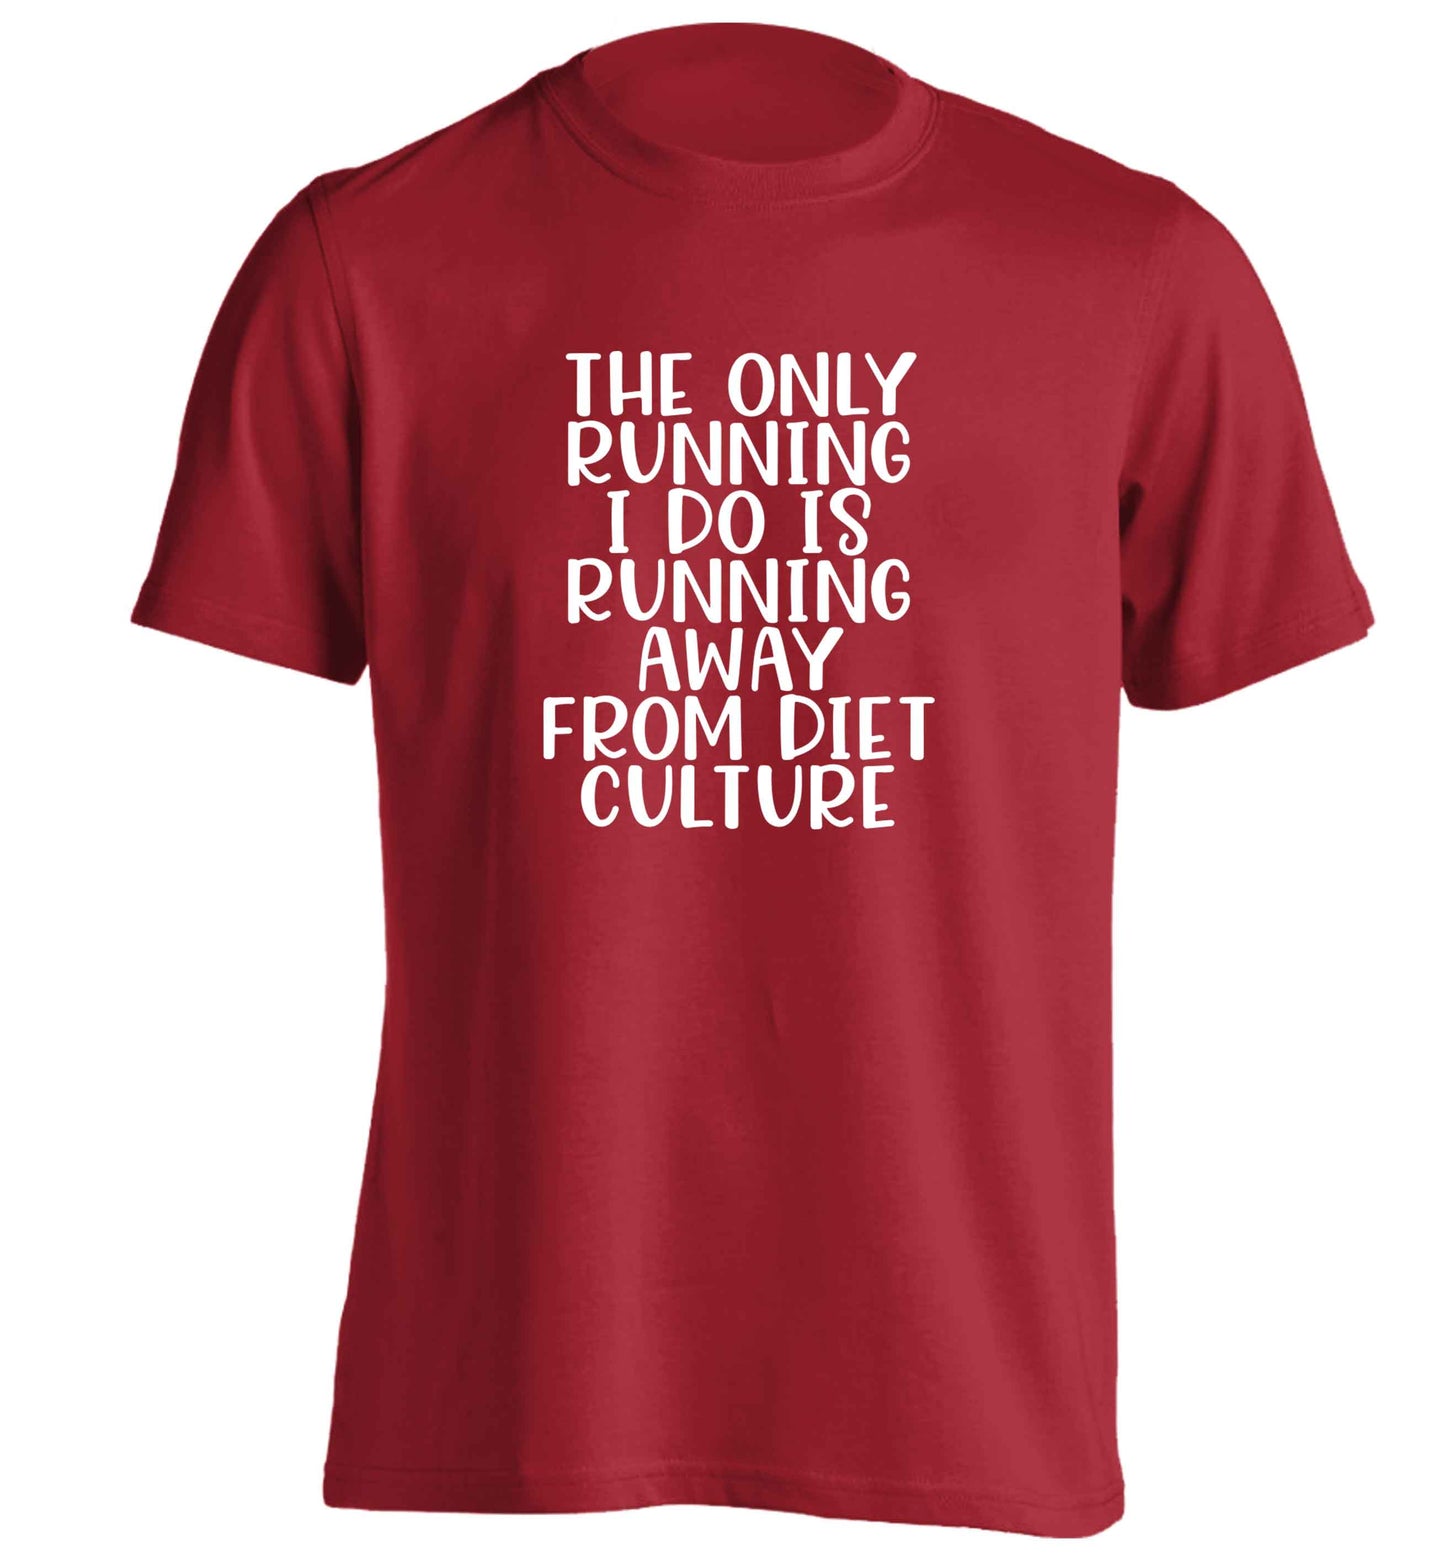 The only running I do is running away from diet culture adults unisex red Tshirt 2XL